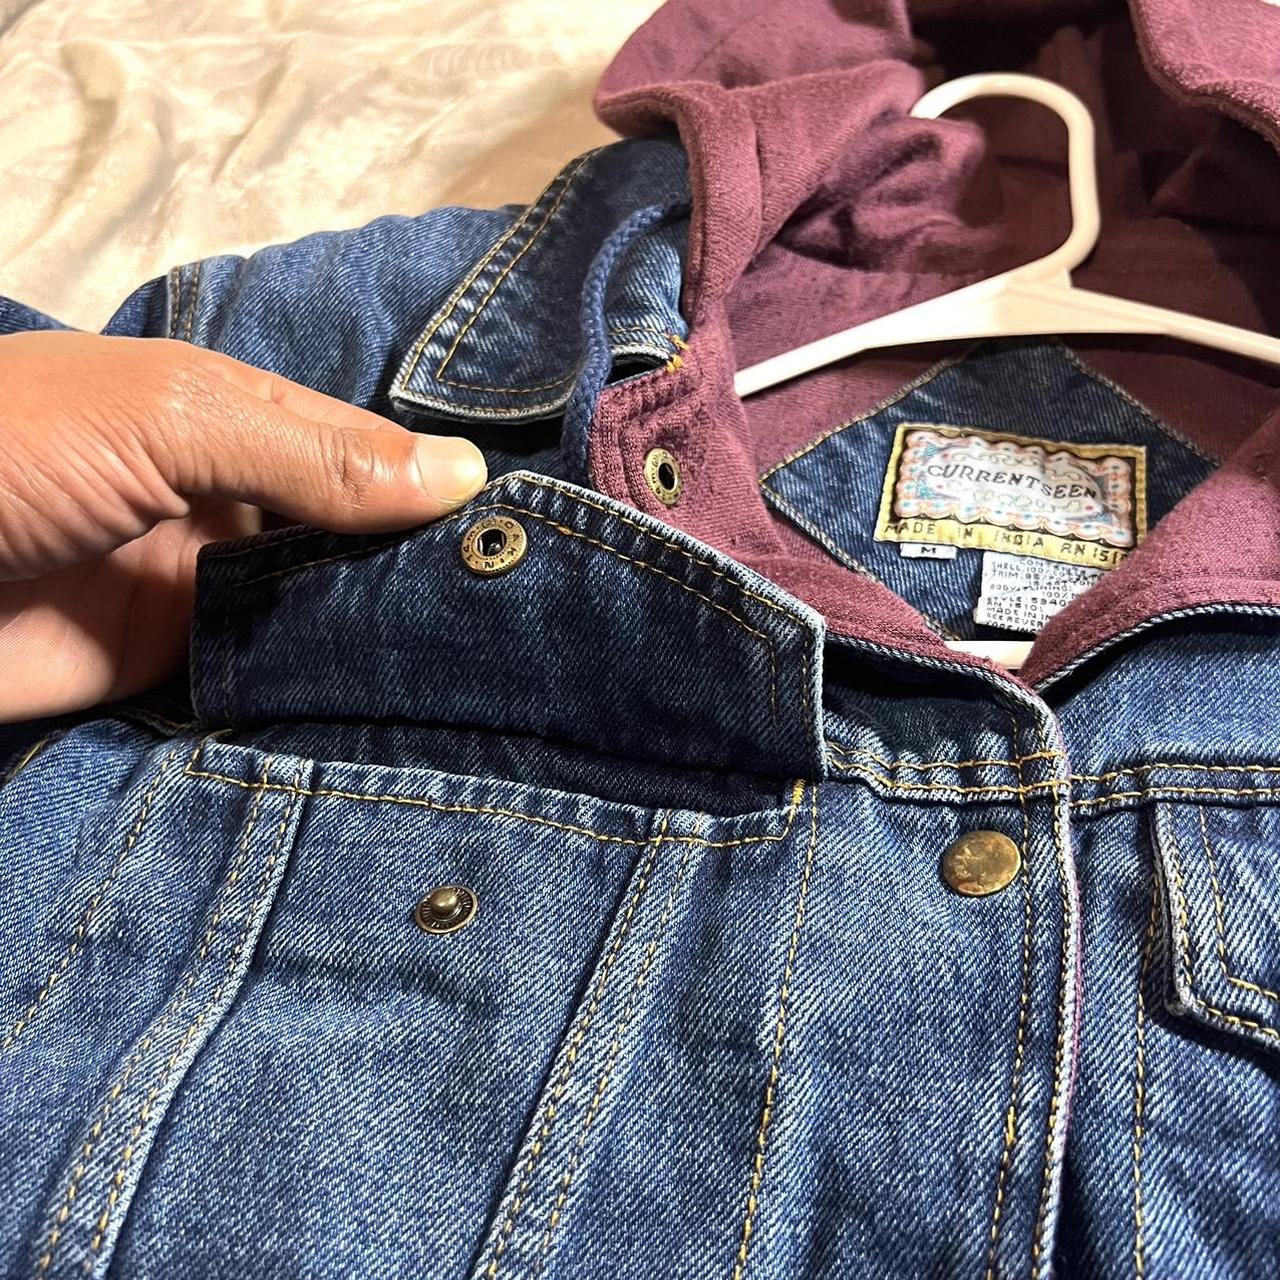 Current Seen Women's Burgundy and Blue Jacket (6)